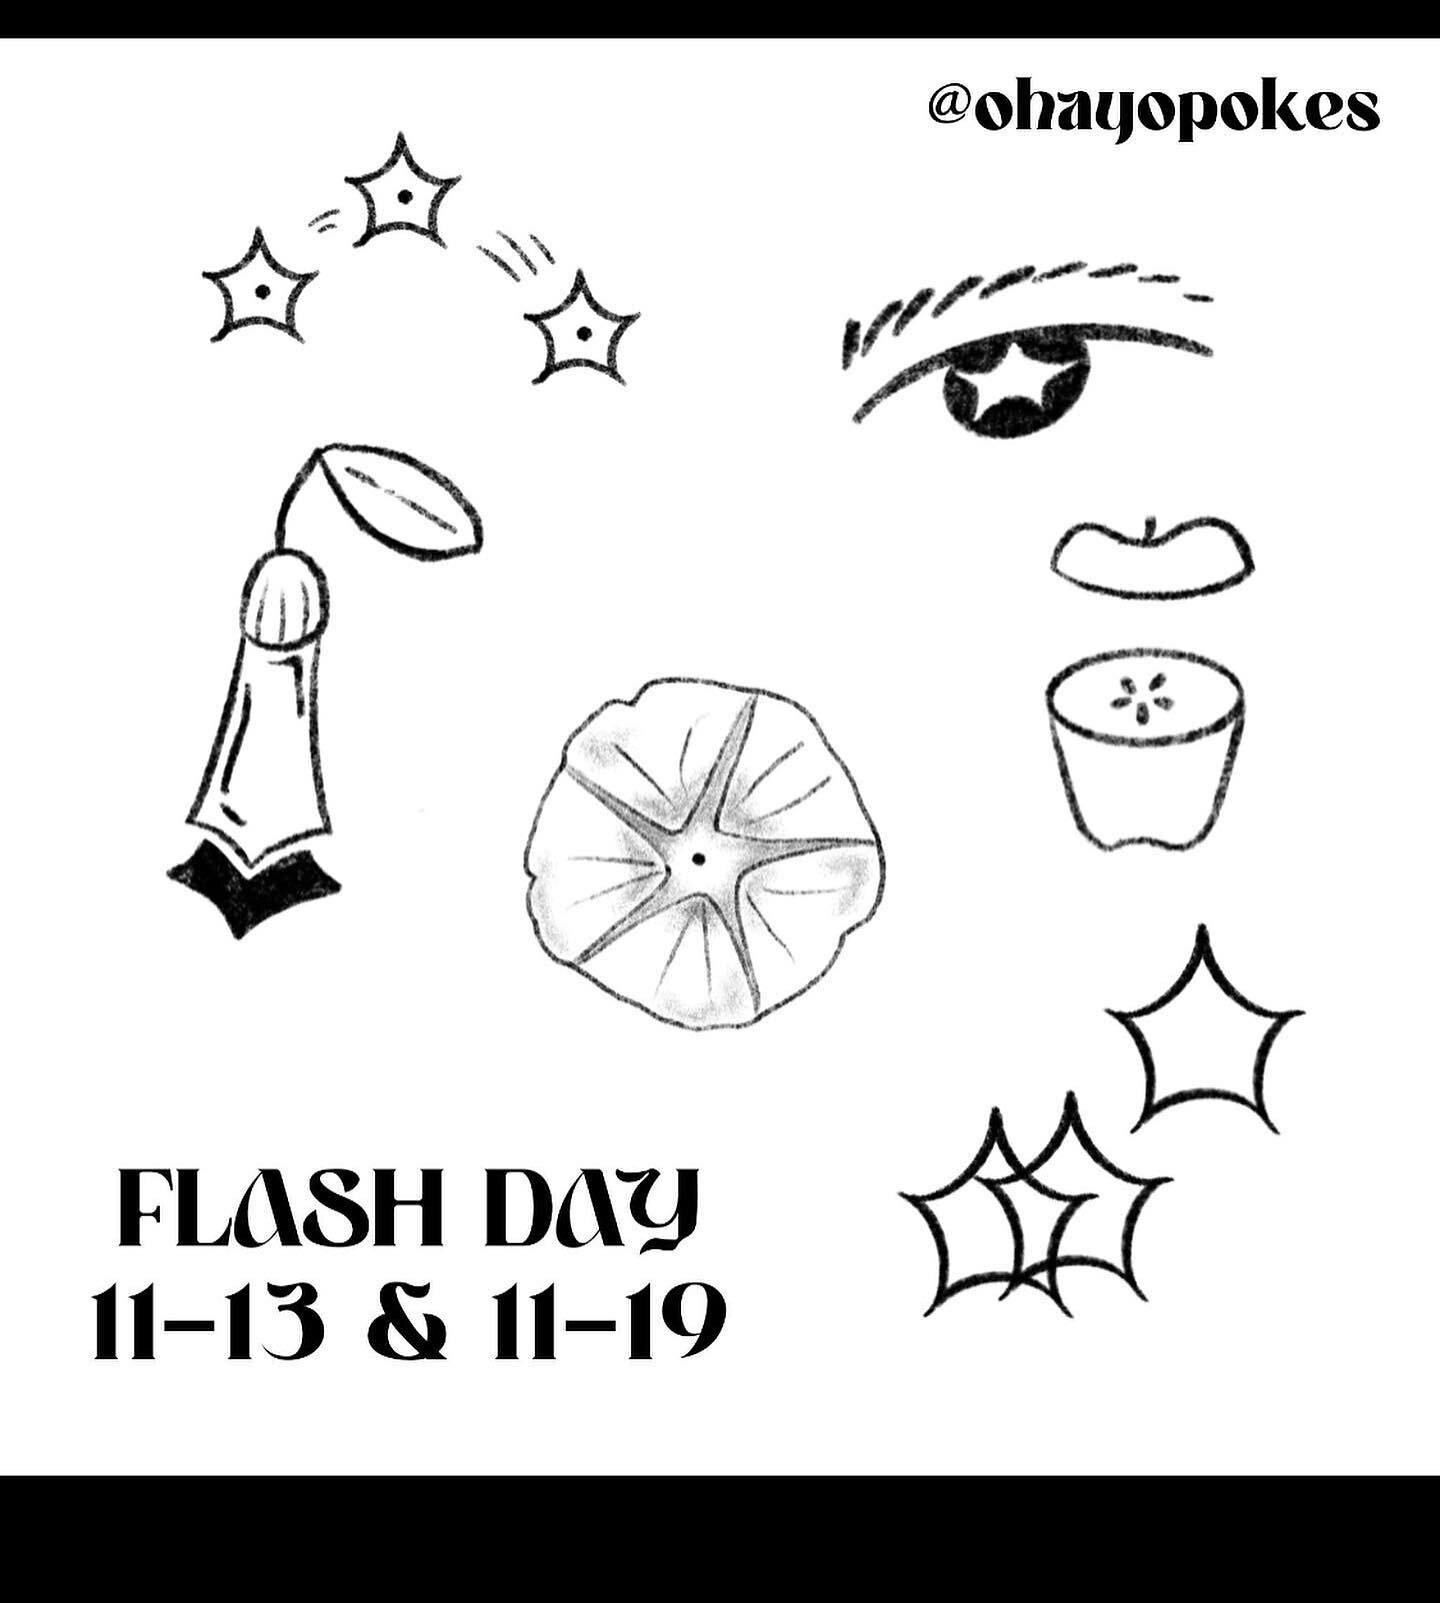 Excited to announce hosting flash days on both weekends of this years E.A.S.T event! East Austin studio tour is a magical, immersive, visceral experience of exploring the inner city via artists studios. It&rsquo;s a very personal way to connect with 